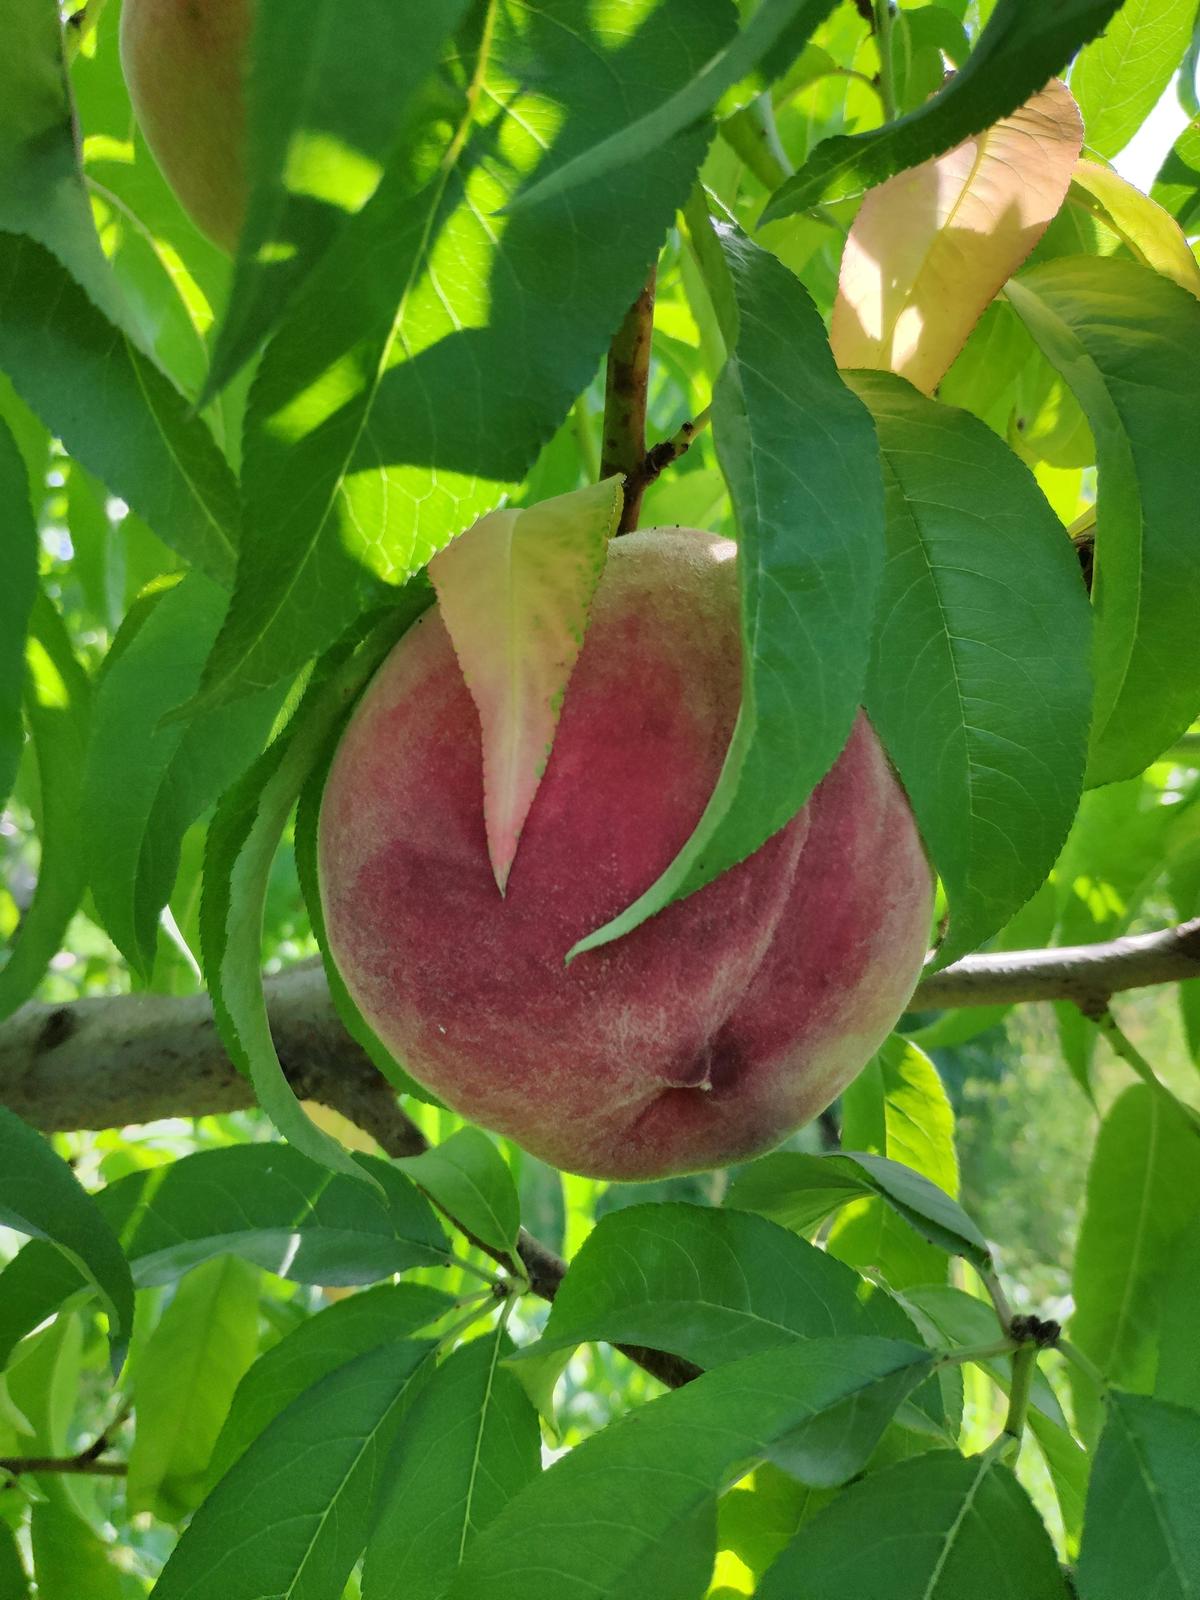 A ripe peach in a tree ready to be picked